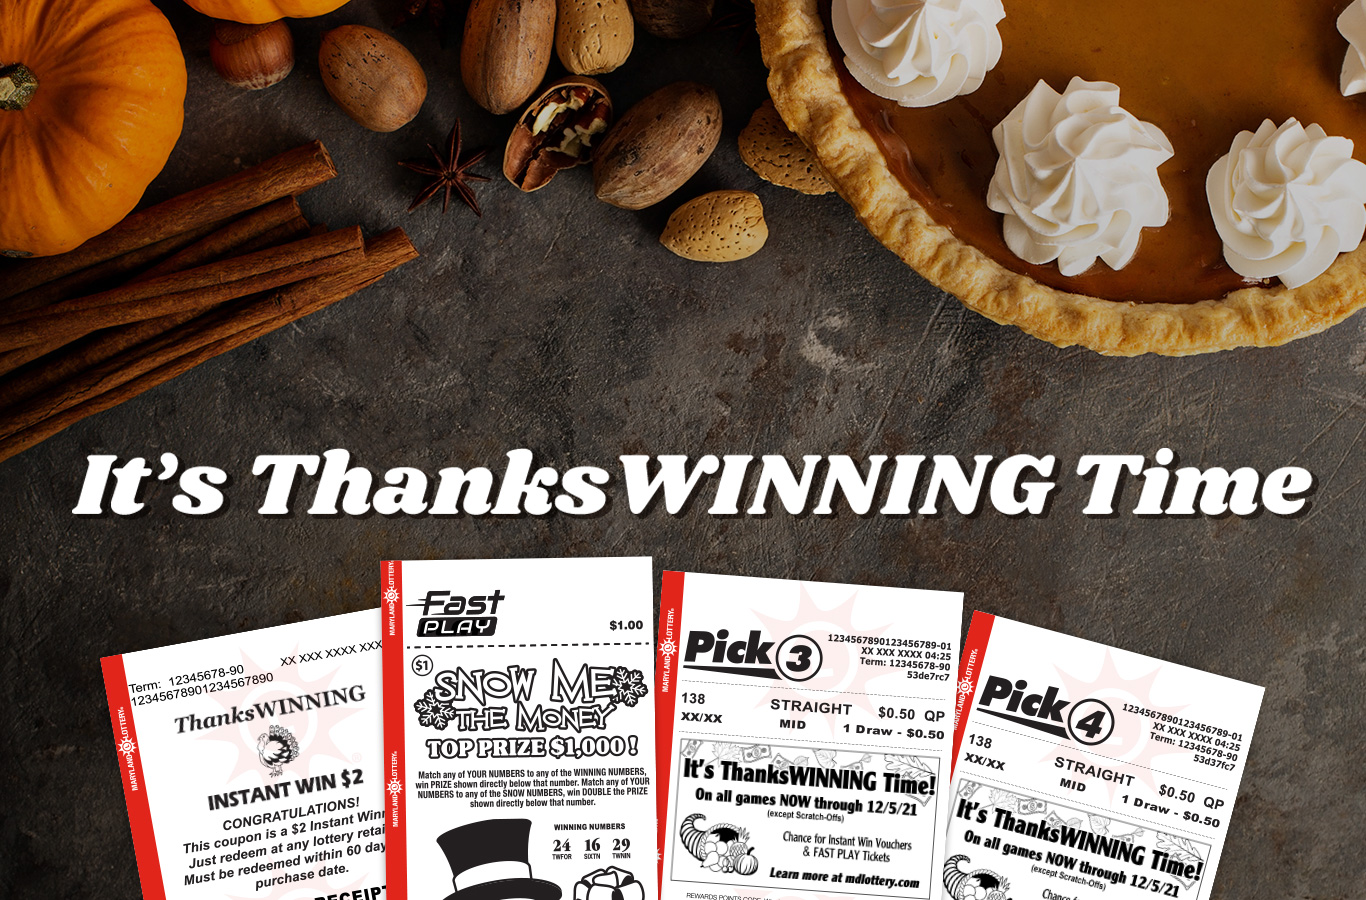 Through December 6, play any draw game for an extra chance to win!